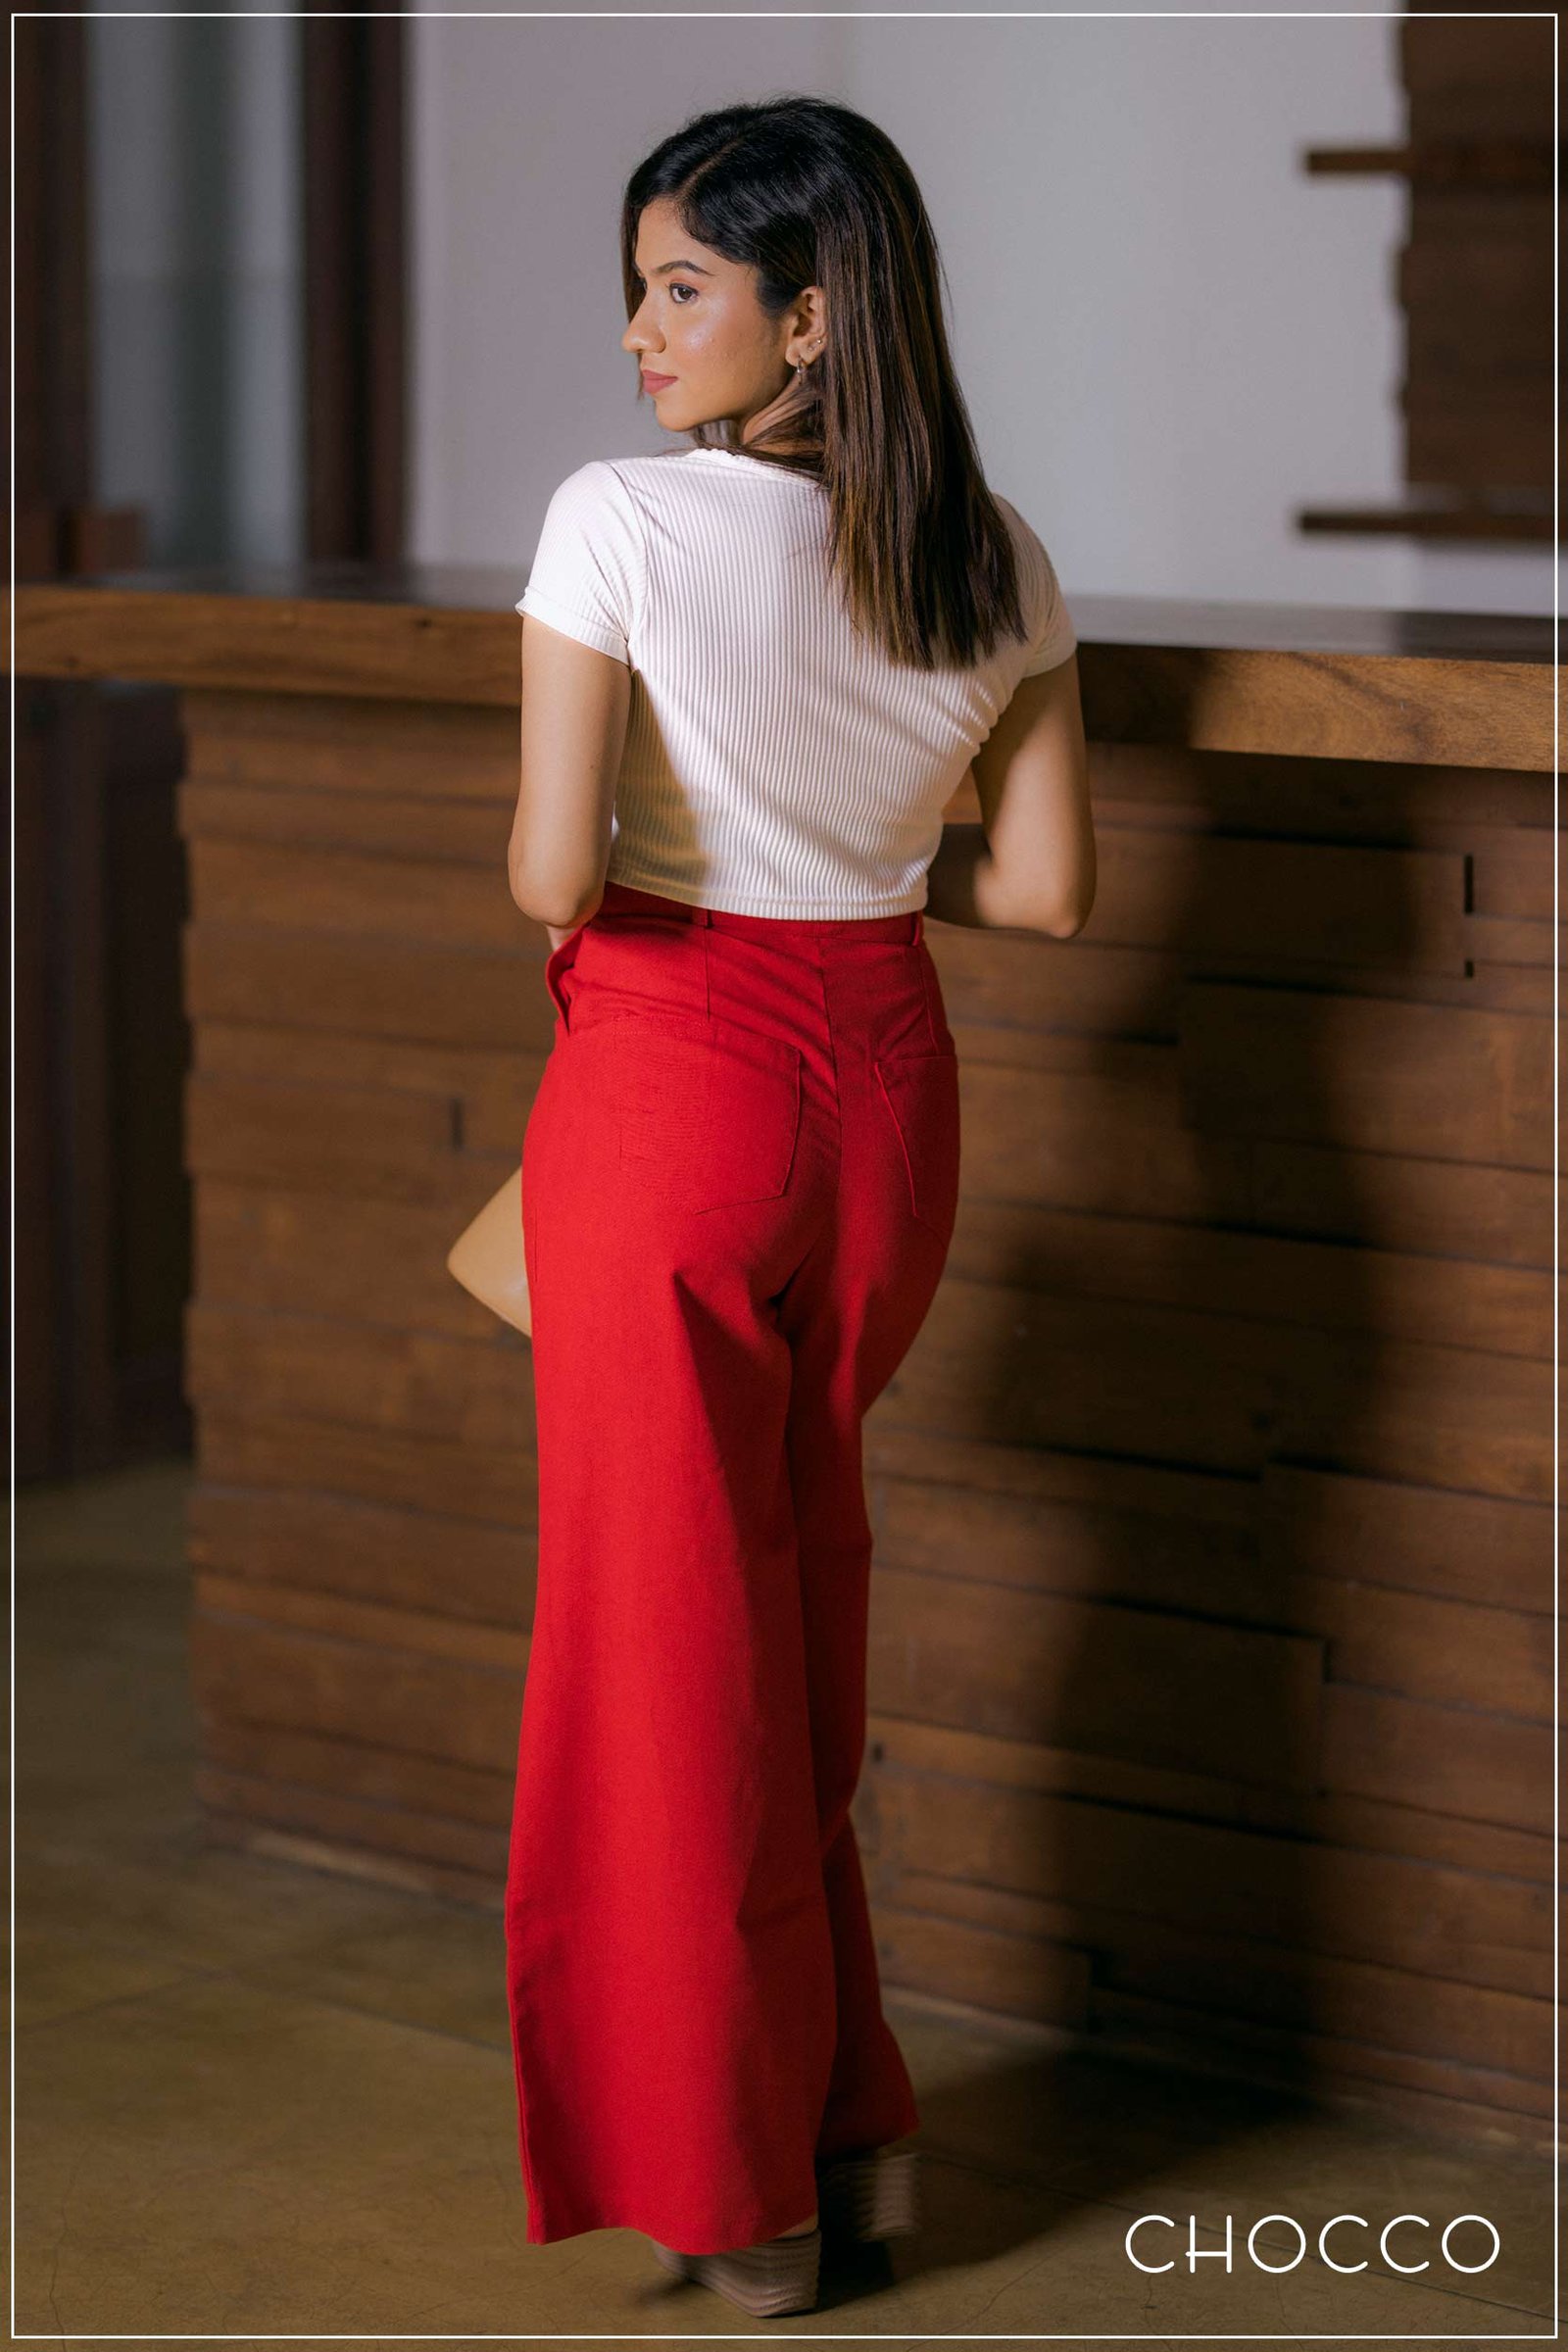 CHOCCO Iconic High Waist Wide Leg Linen Pant - True Red